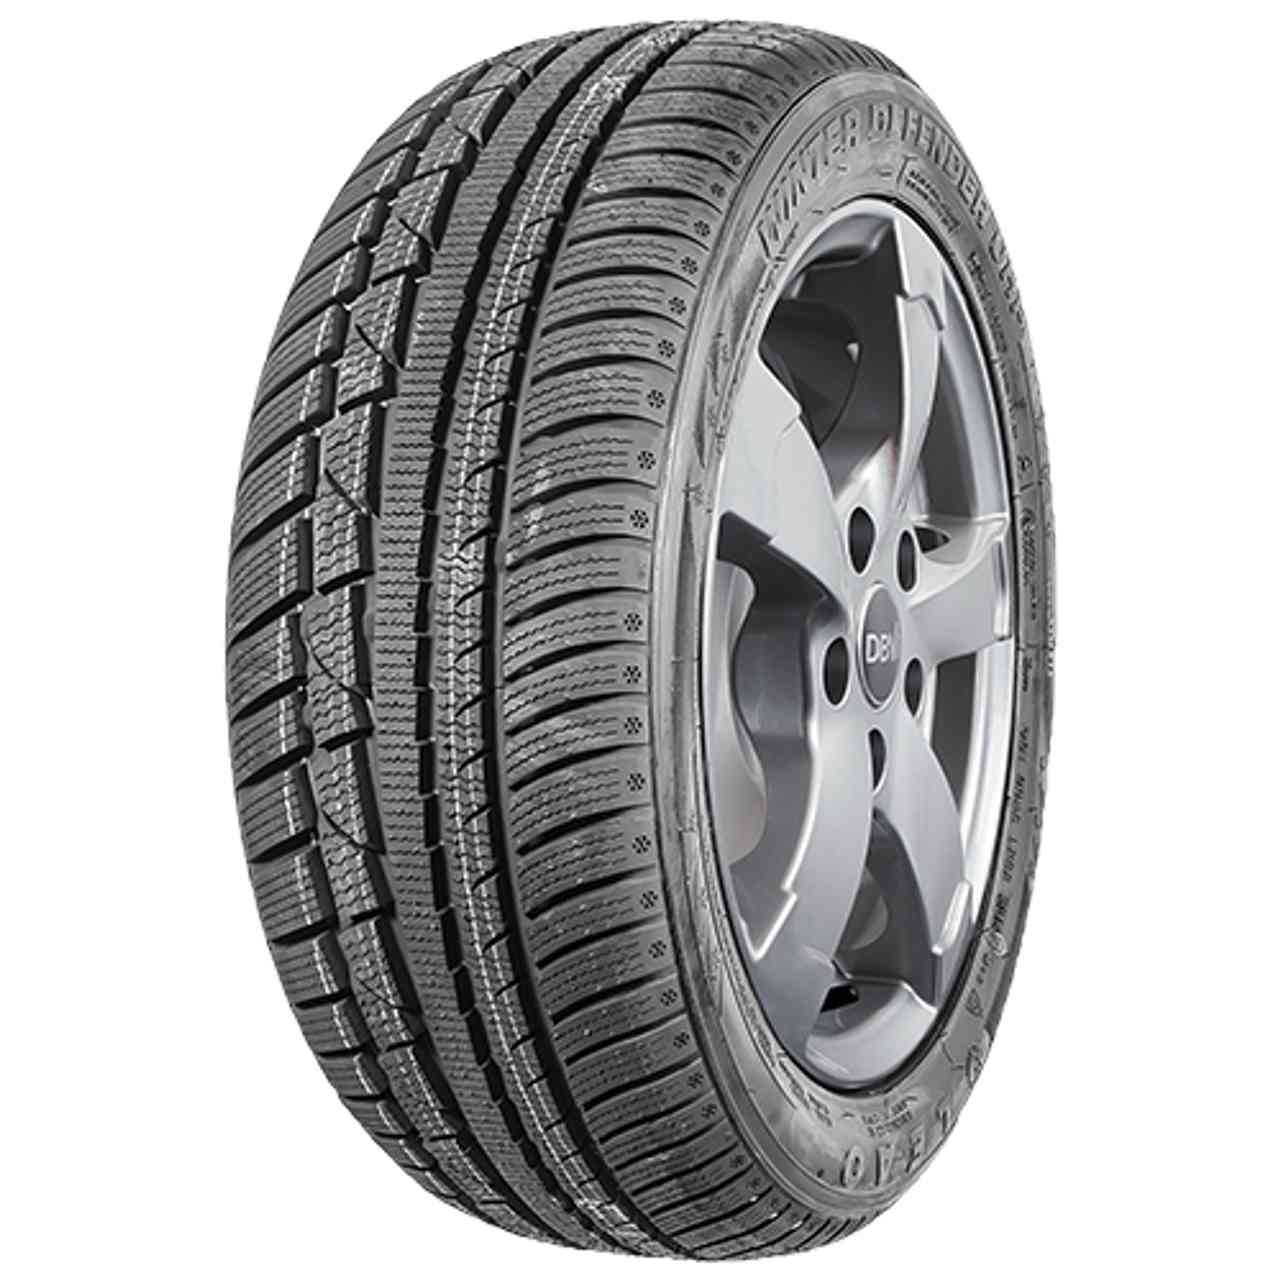 LEAO WINTER DEFENDER UHP 235/60R18 107H BSW XL